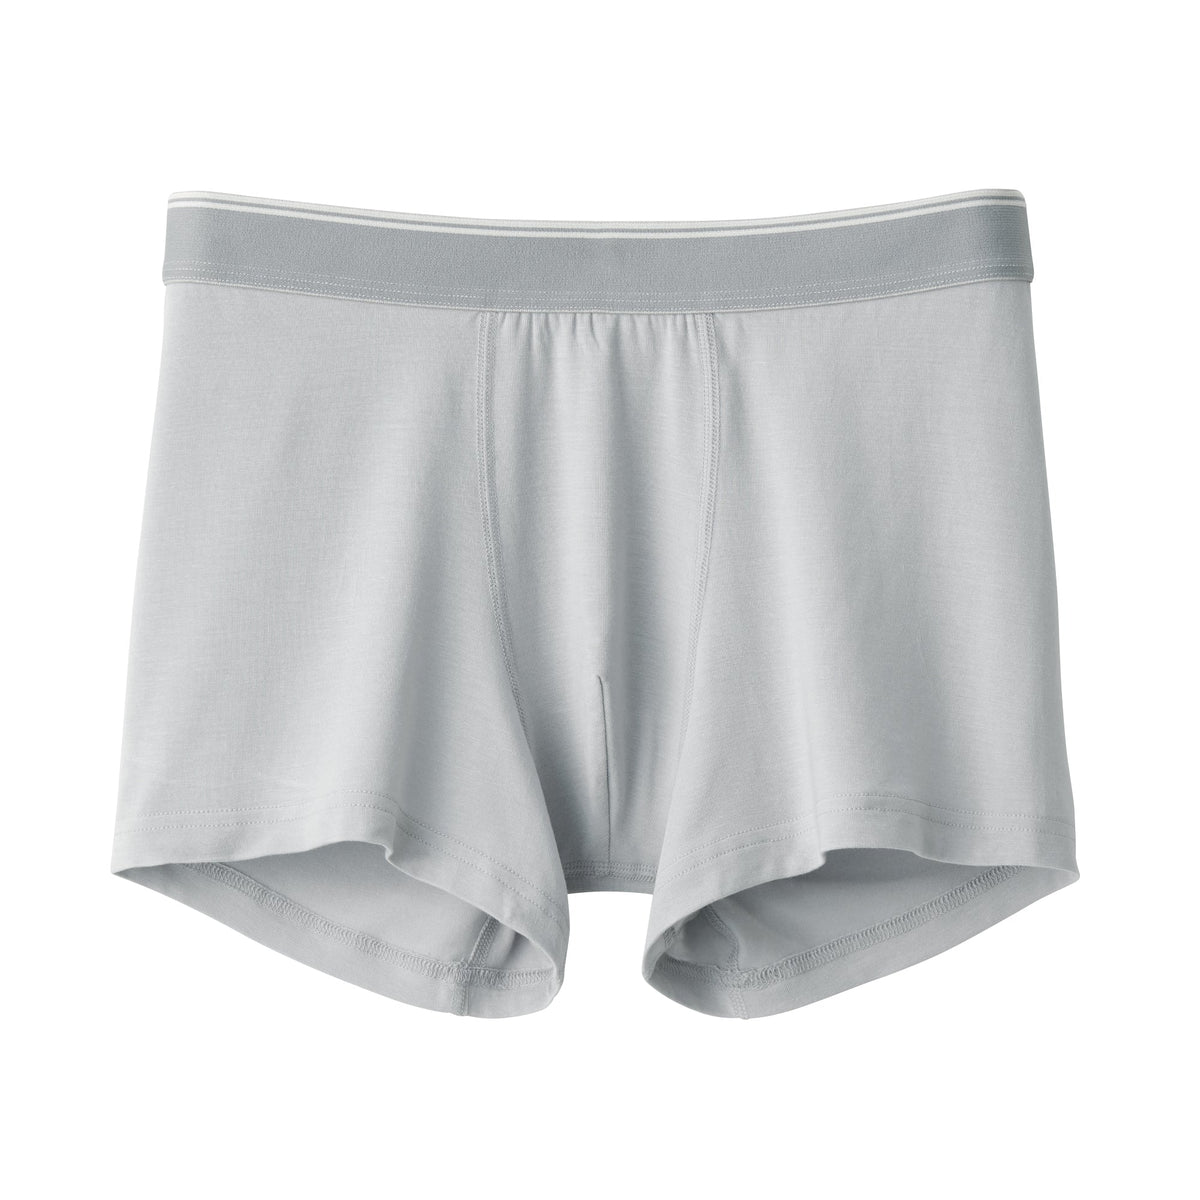 Soft Packing Boxer Brief – Whipsmart